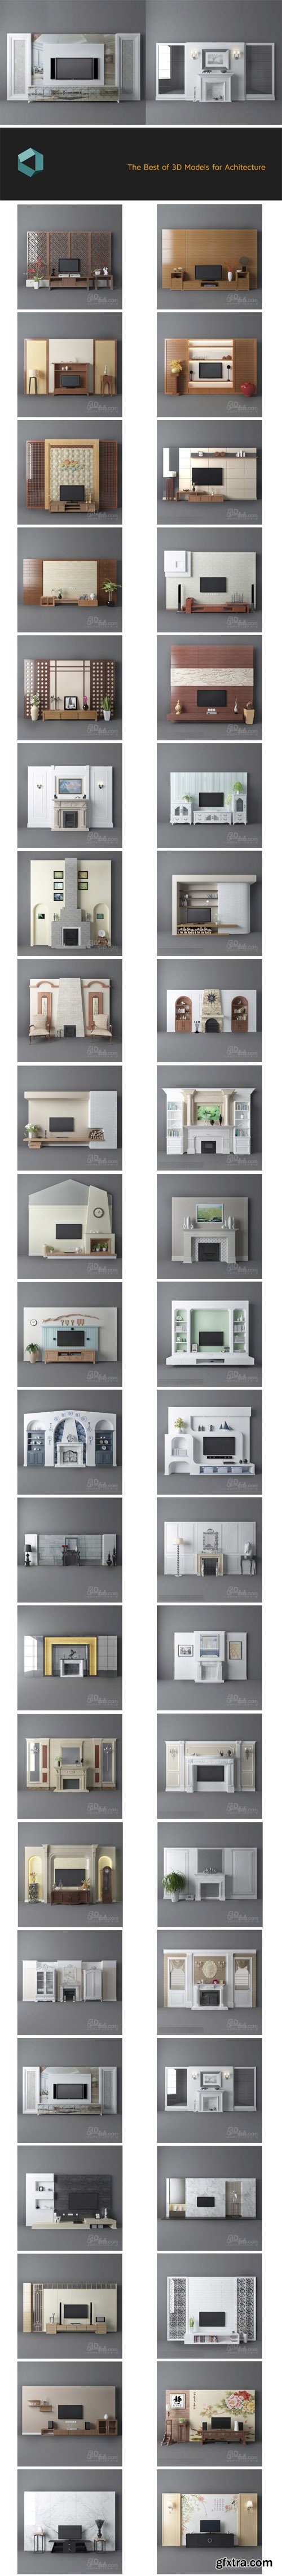 TV & Media Furniture - 114 Interior Models with Various Designs and Styles